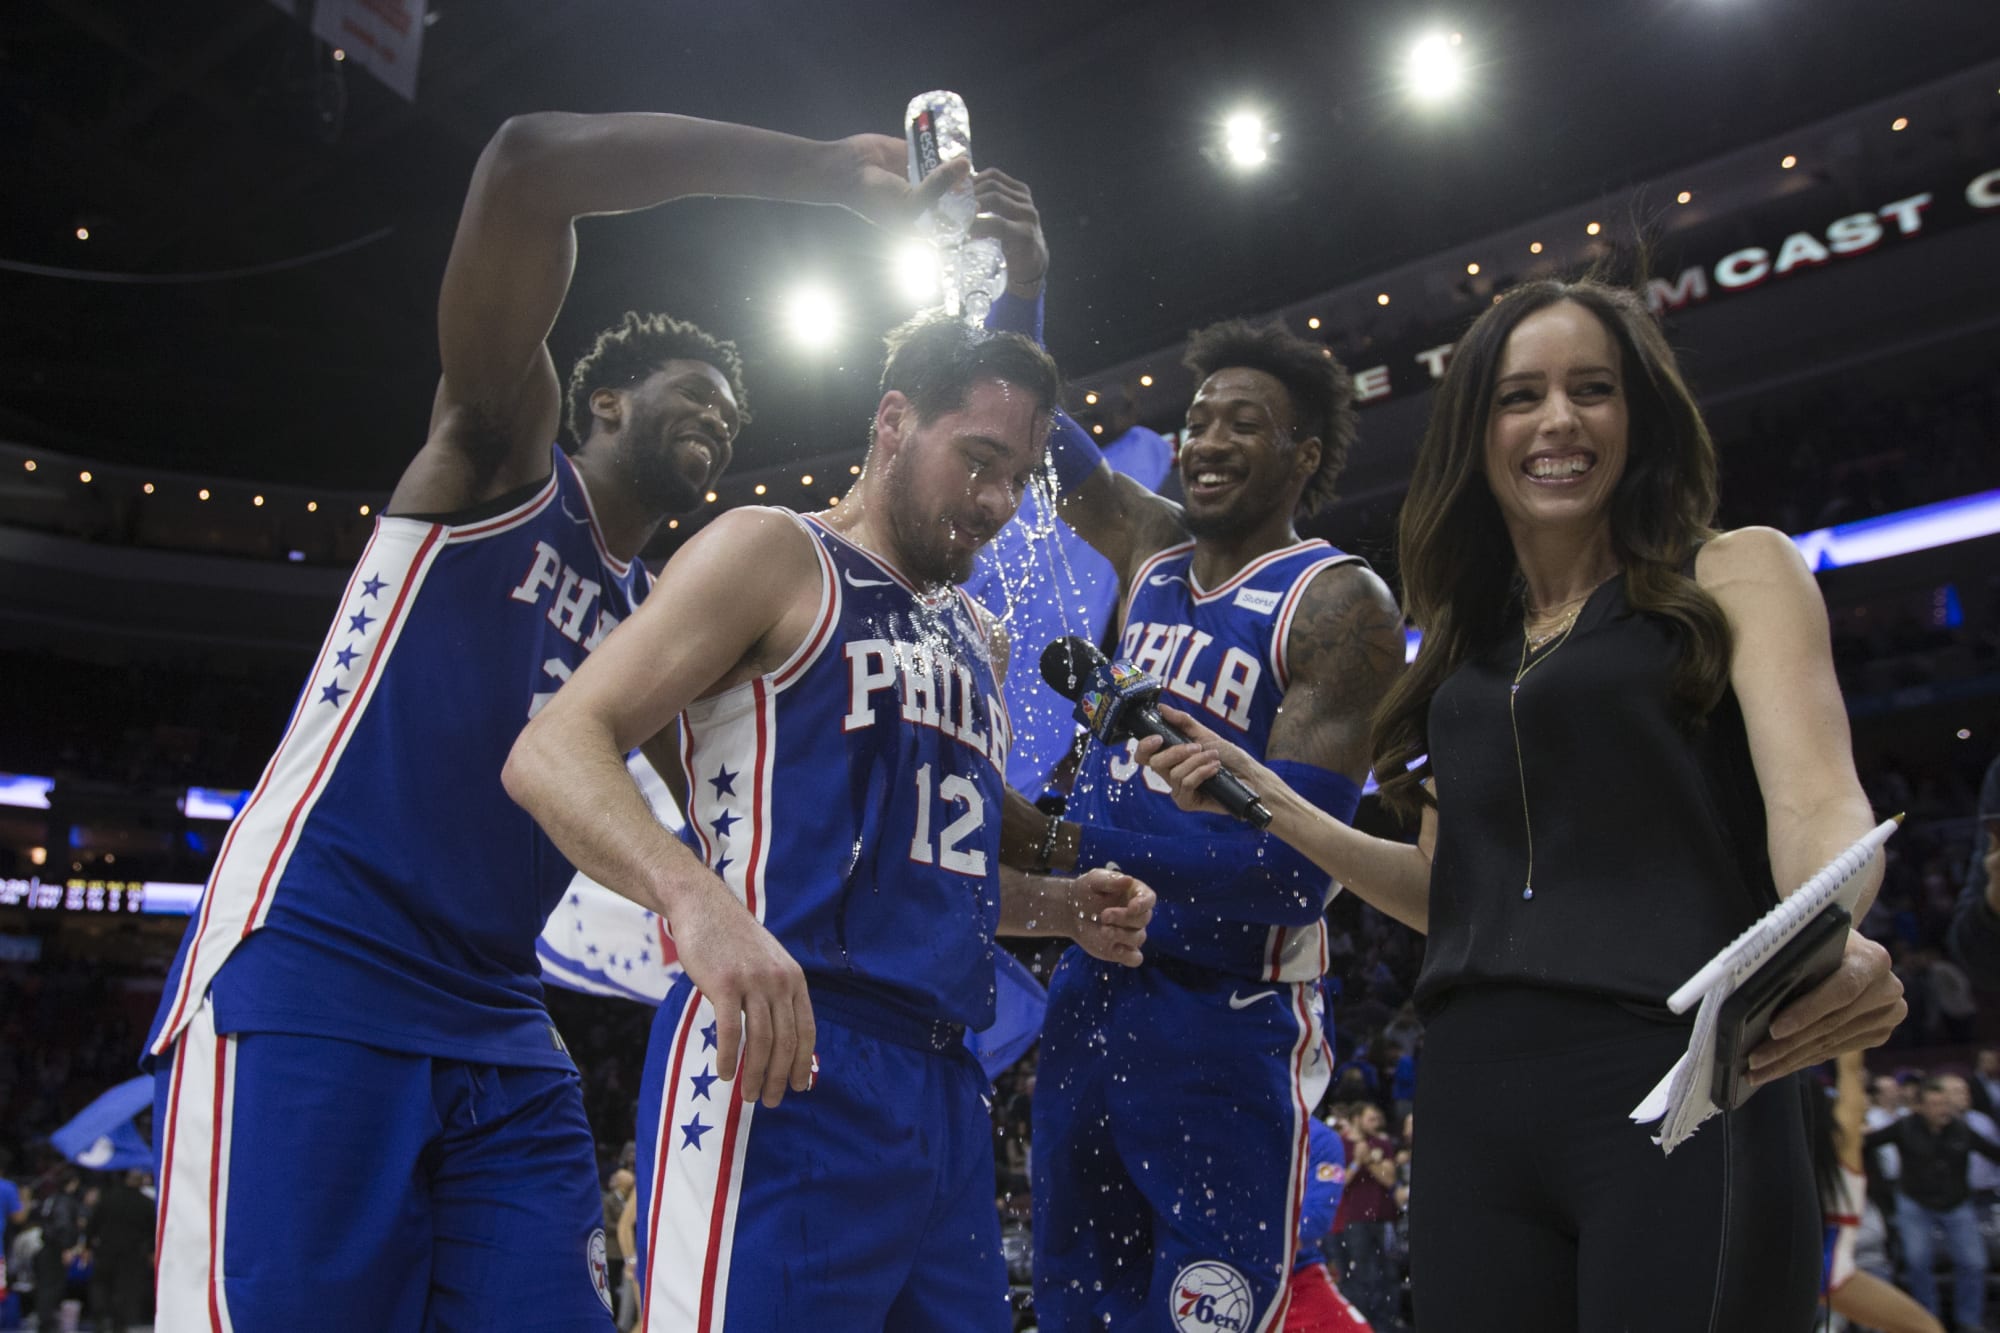 Philadelphia 76ers, one more win and they're in NBA Playoffs.